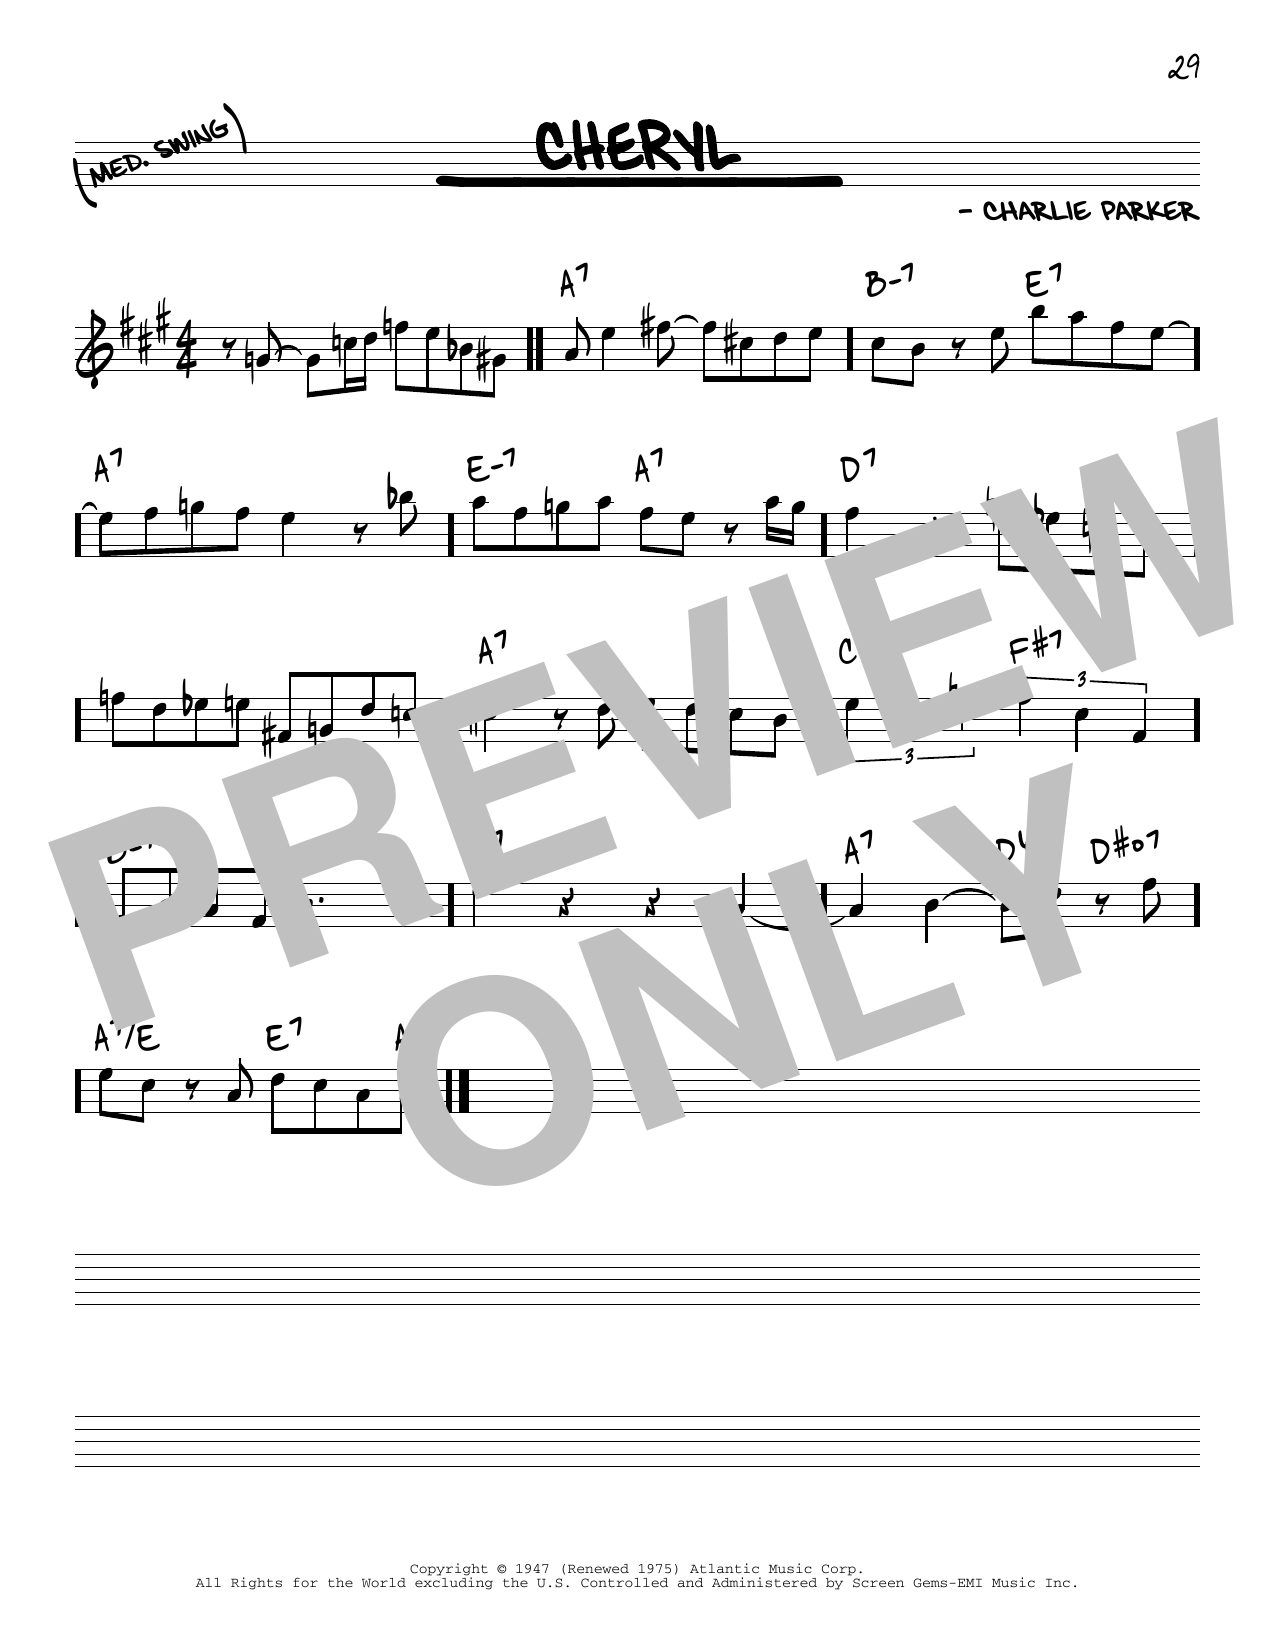 Charlie Parker Cheryl sheet music notes and chords. Download Printable PDF.